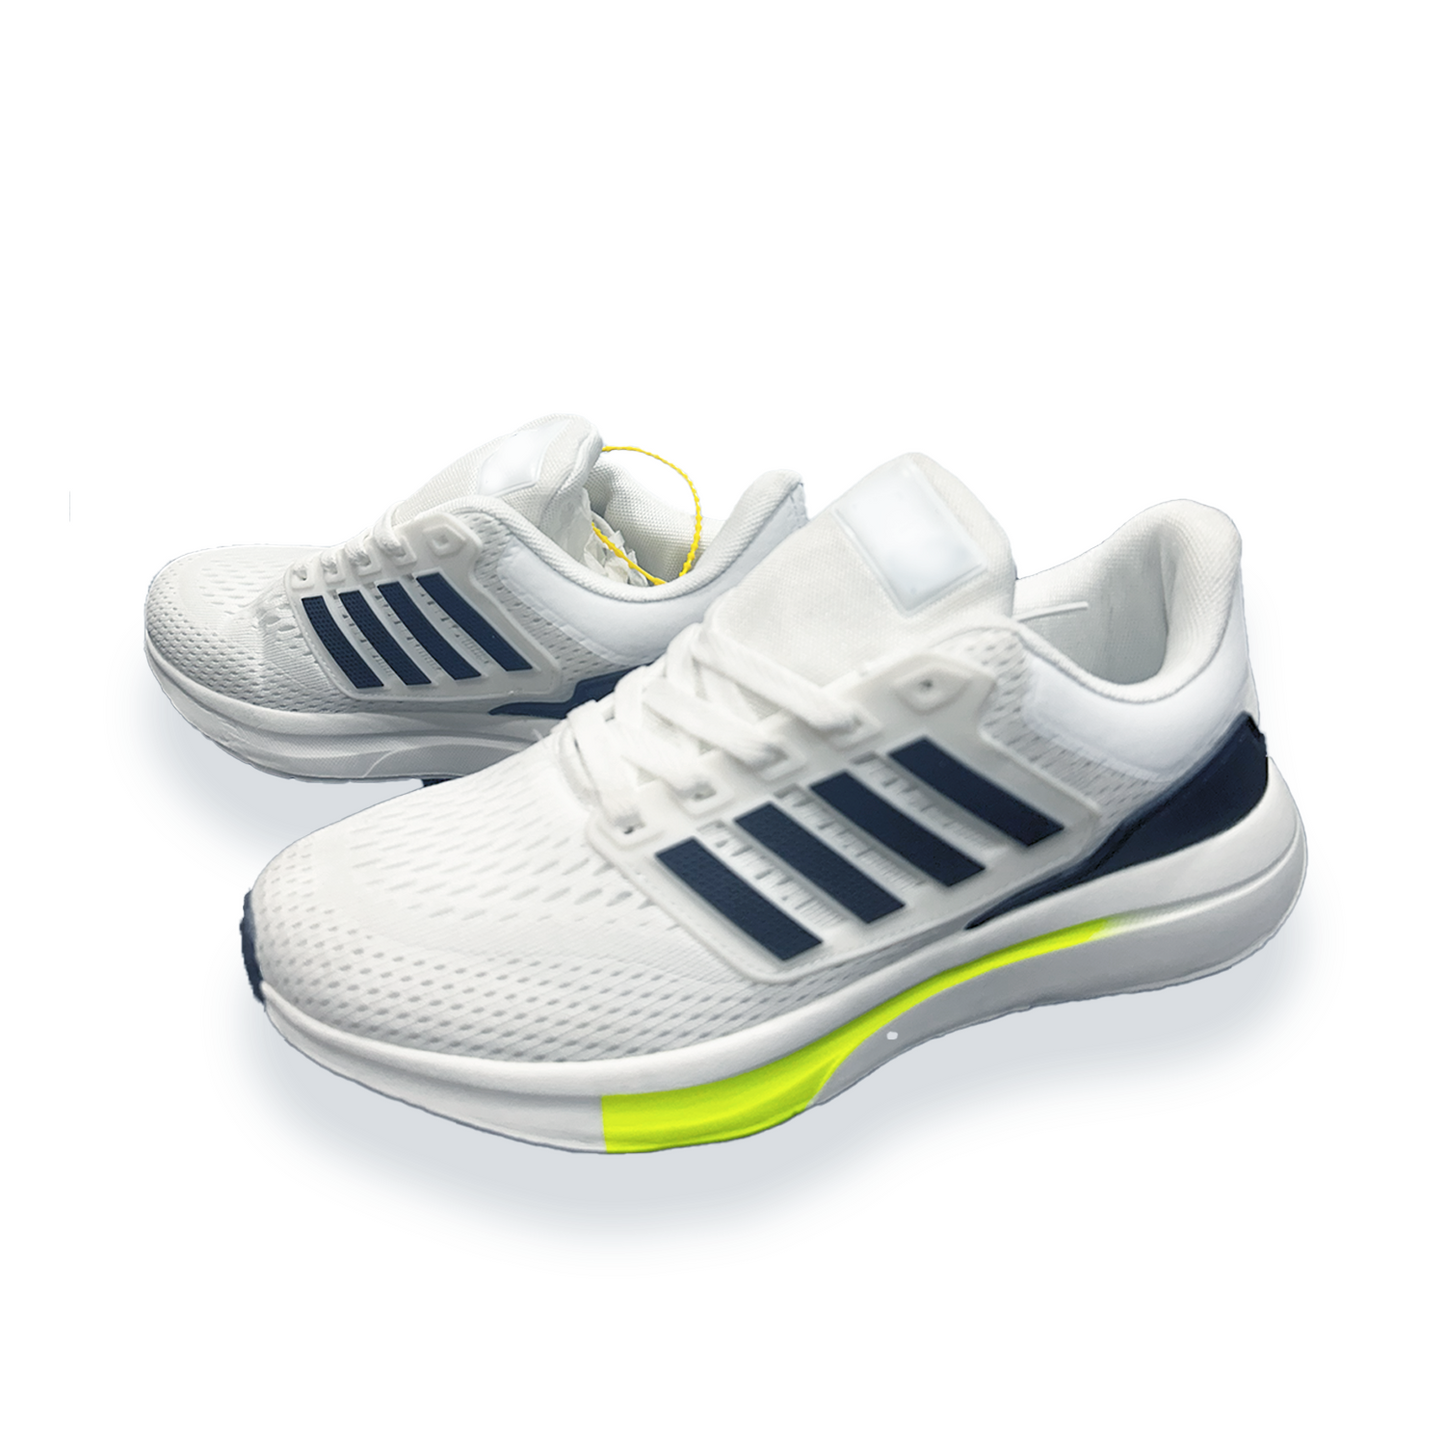 Shoes | Running Shoes | sports shoes for men | mens black running shoes | shoe sports shoes | sports shoes black | sports running shoes for men |mens white running shoes